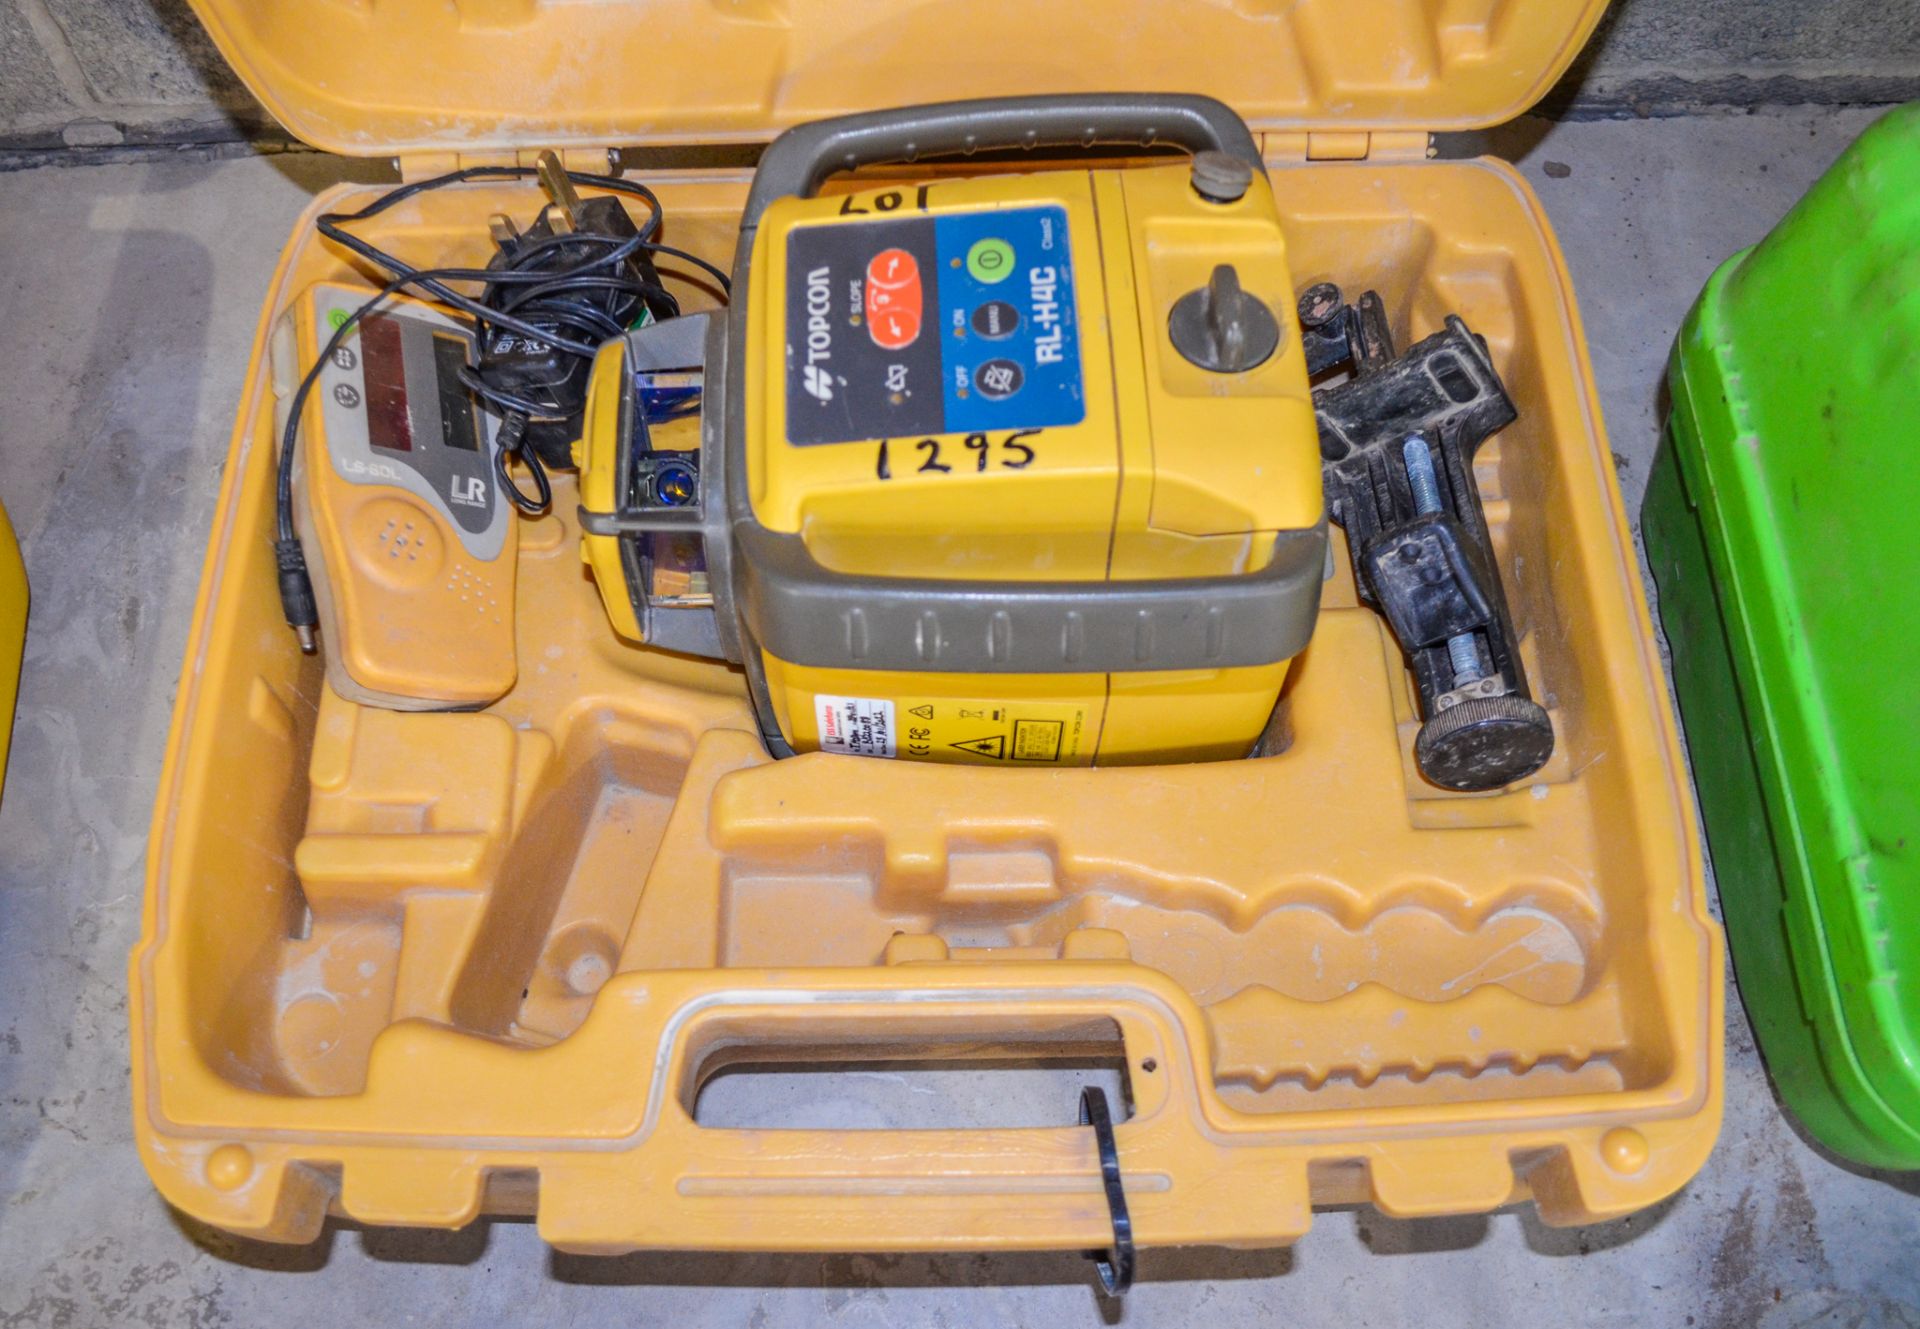 Topcon RL-H4C rotating laser c/w LS-60L receiver, charger and carry case B0220088